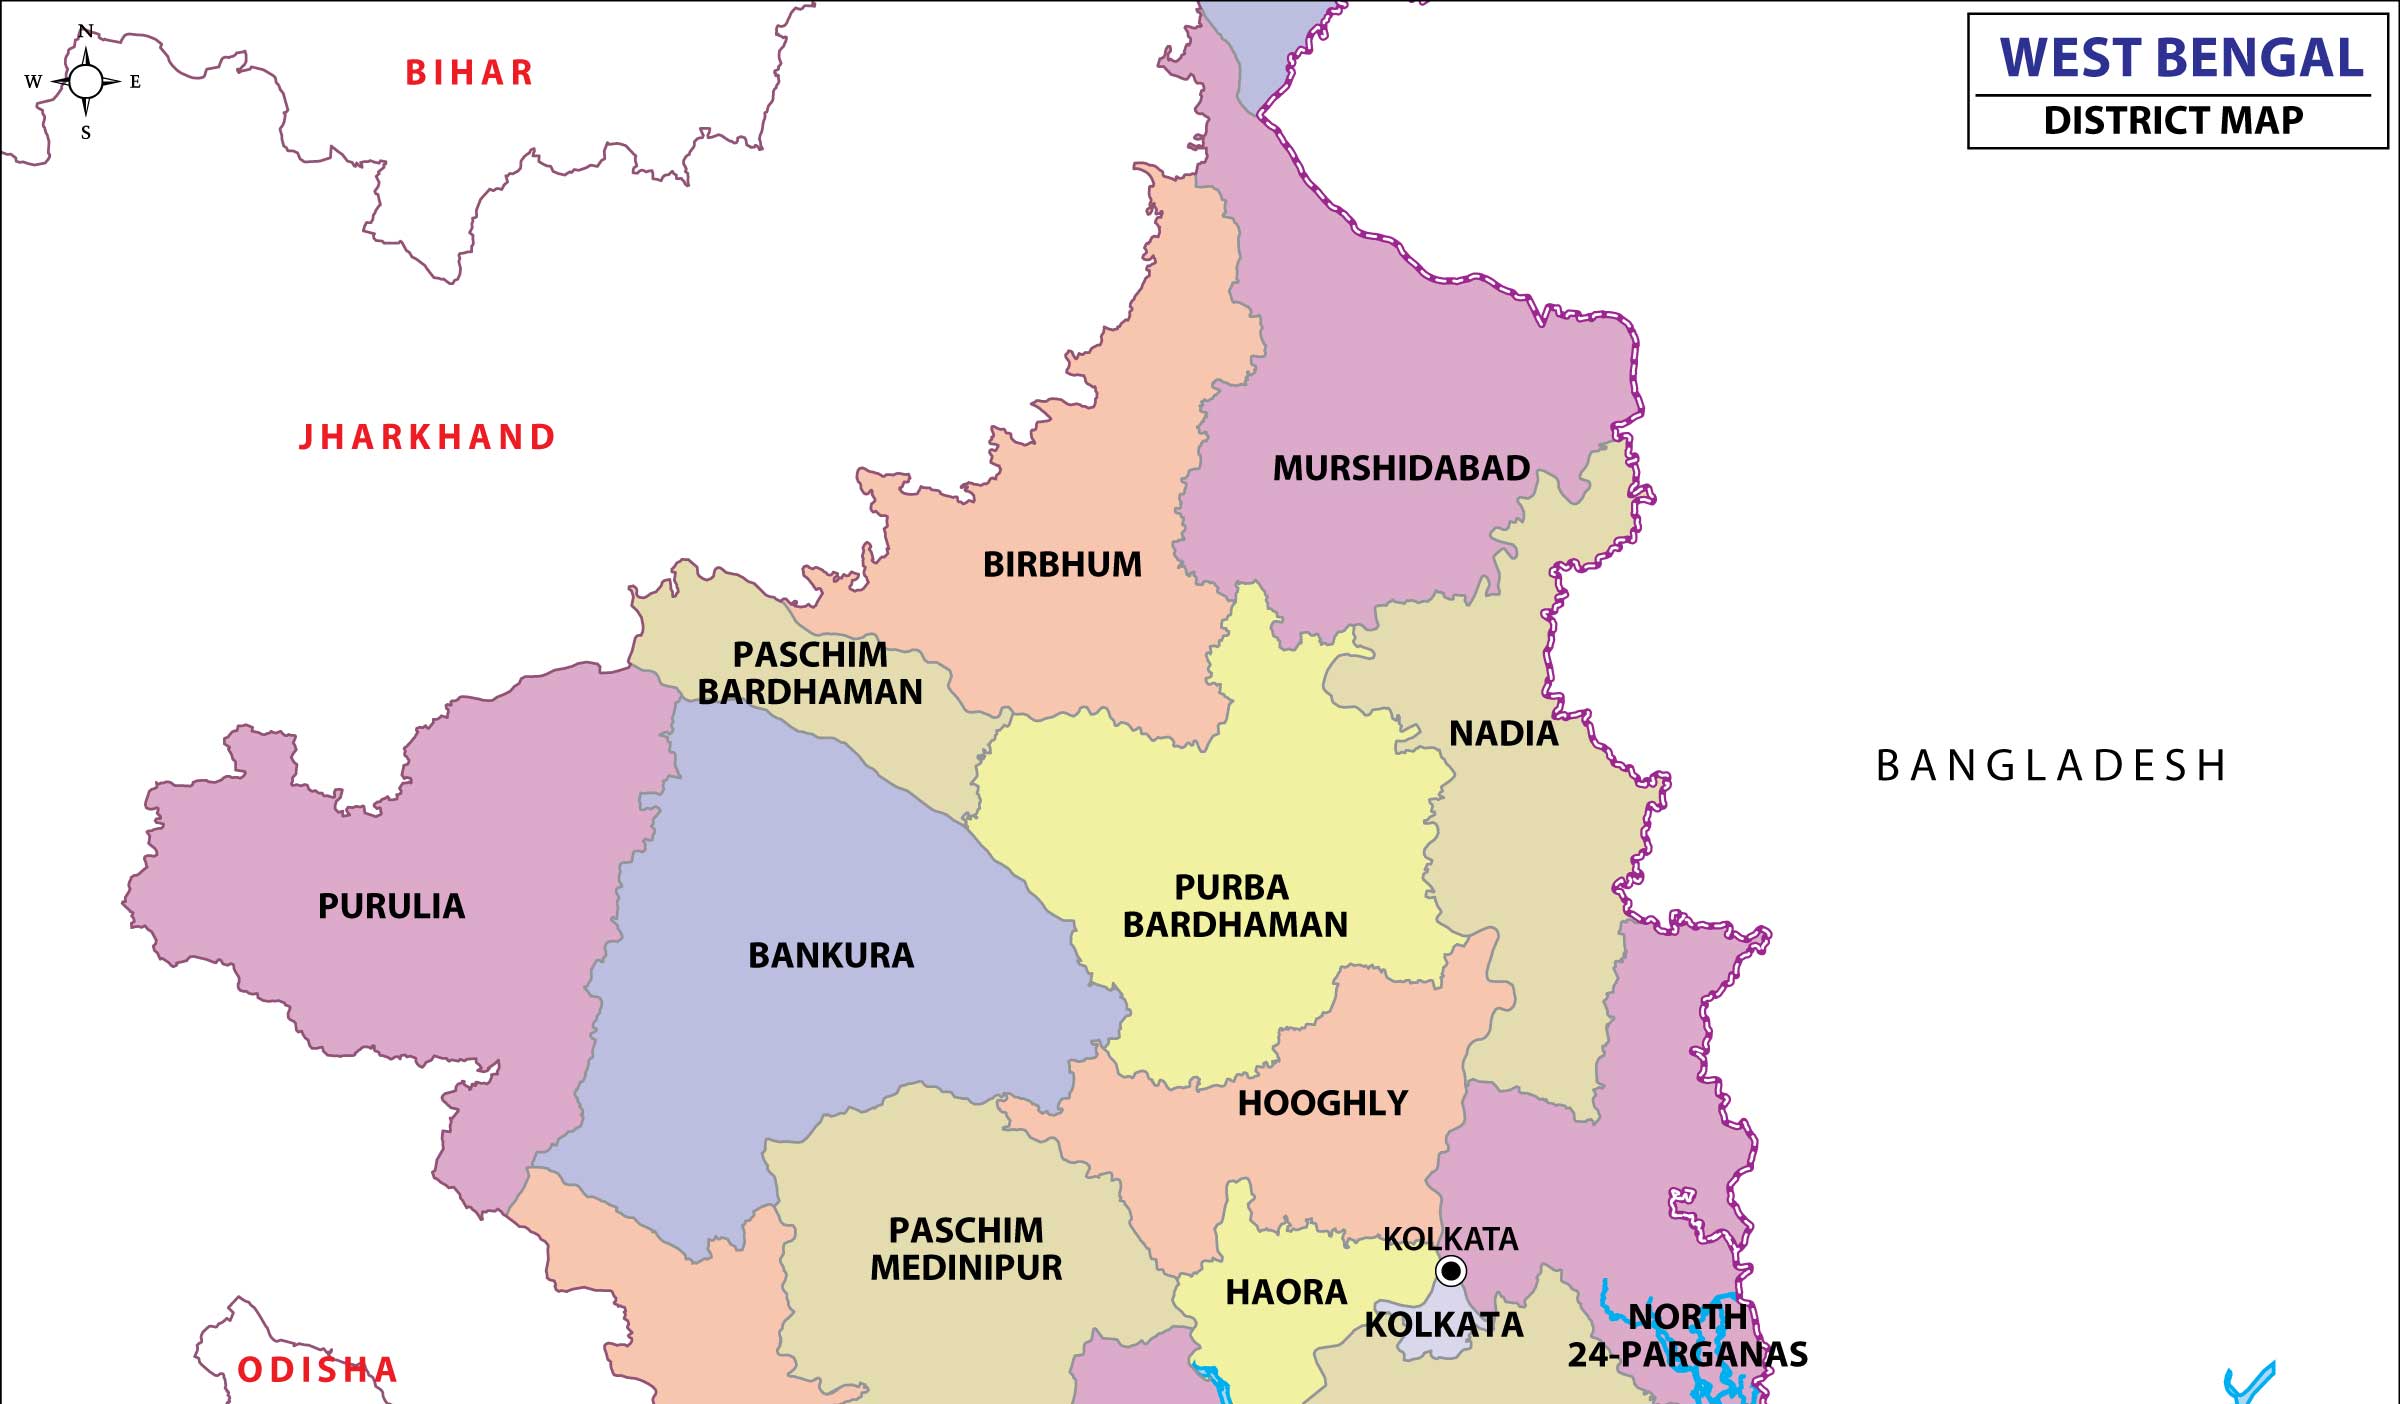 westbengal-district